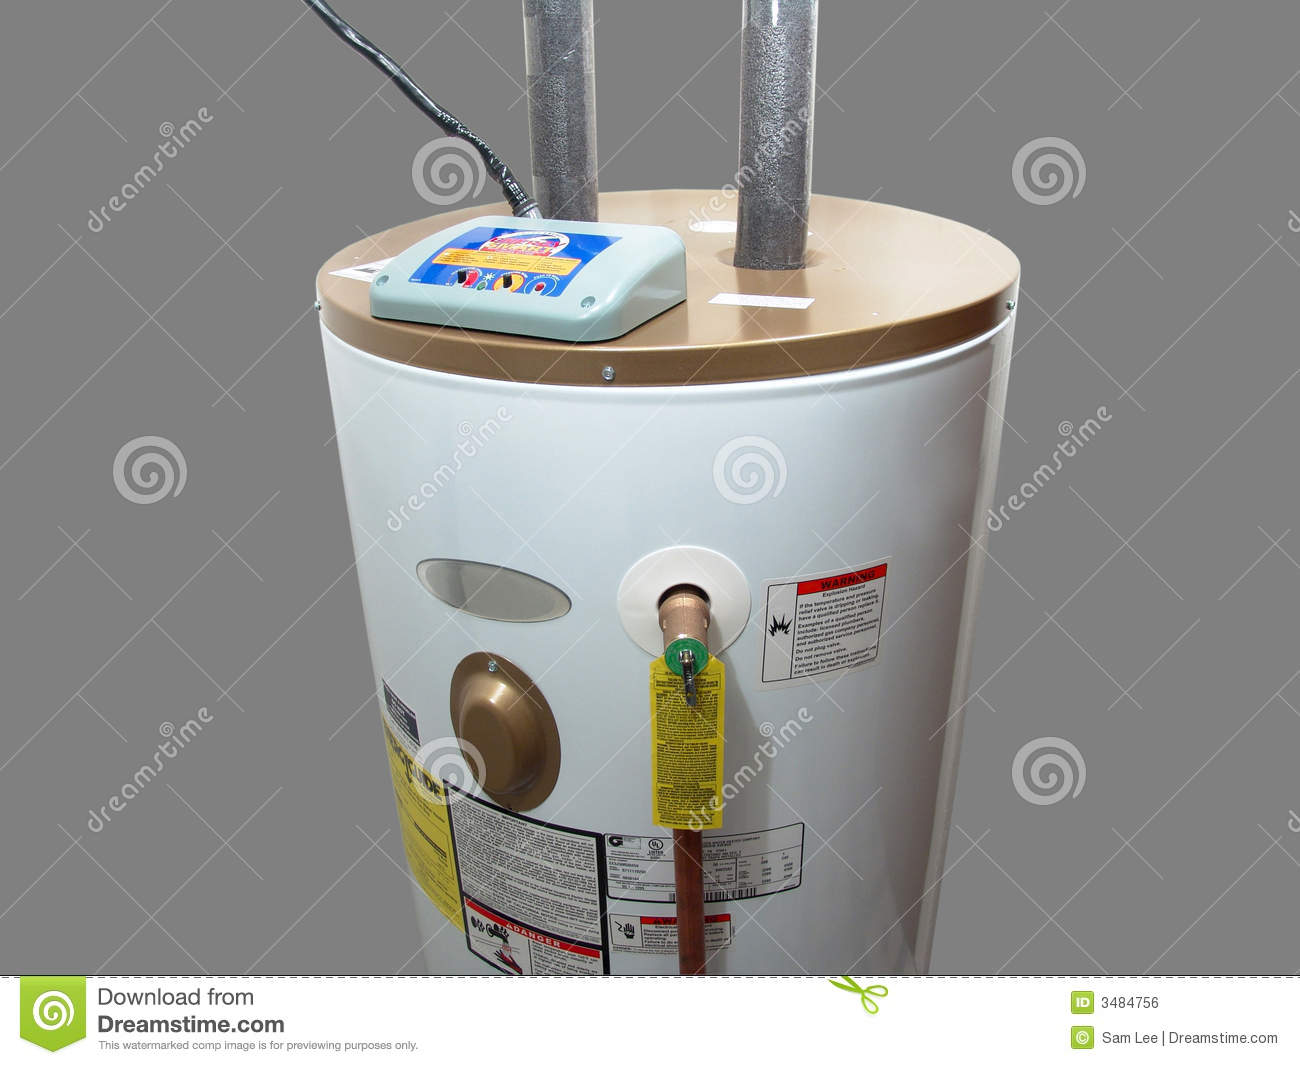 Electric Water Heater Royalty Free Stock Image   Image  3484756